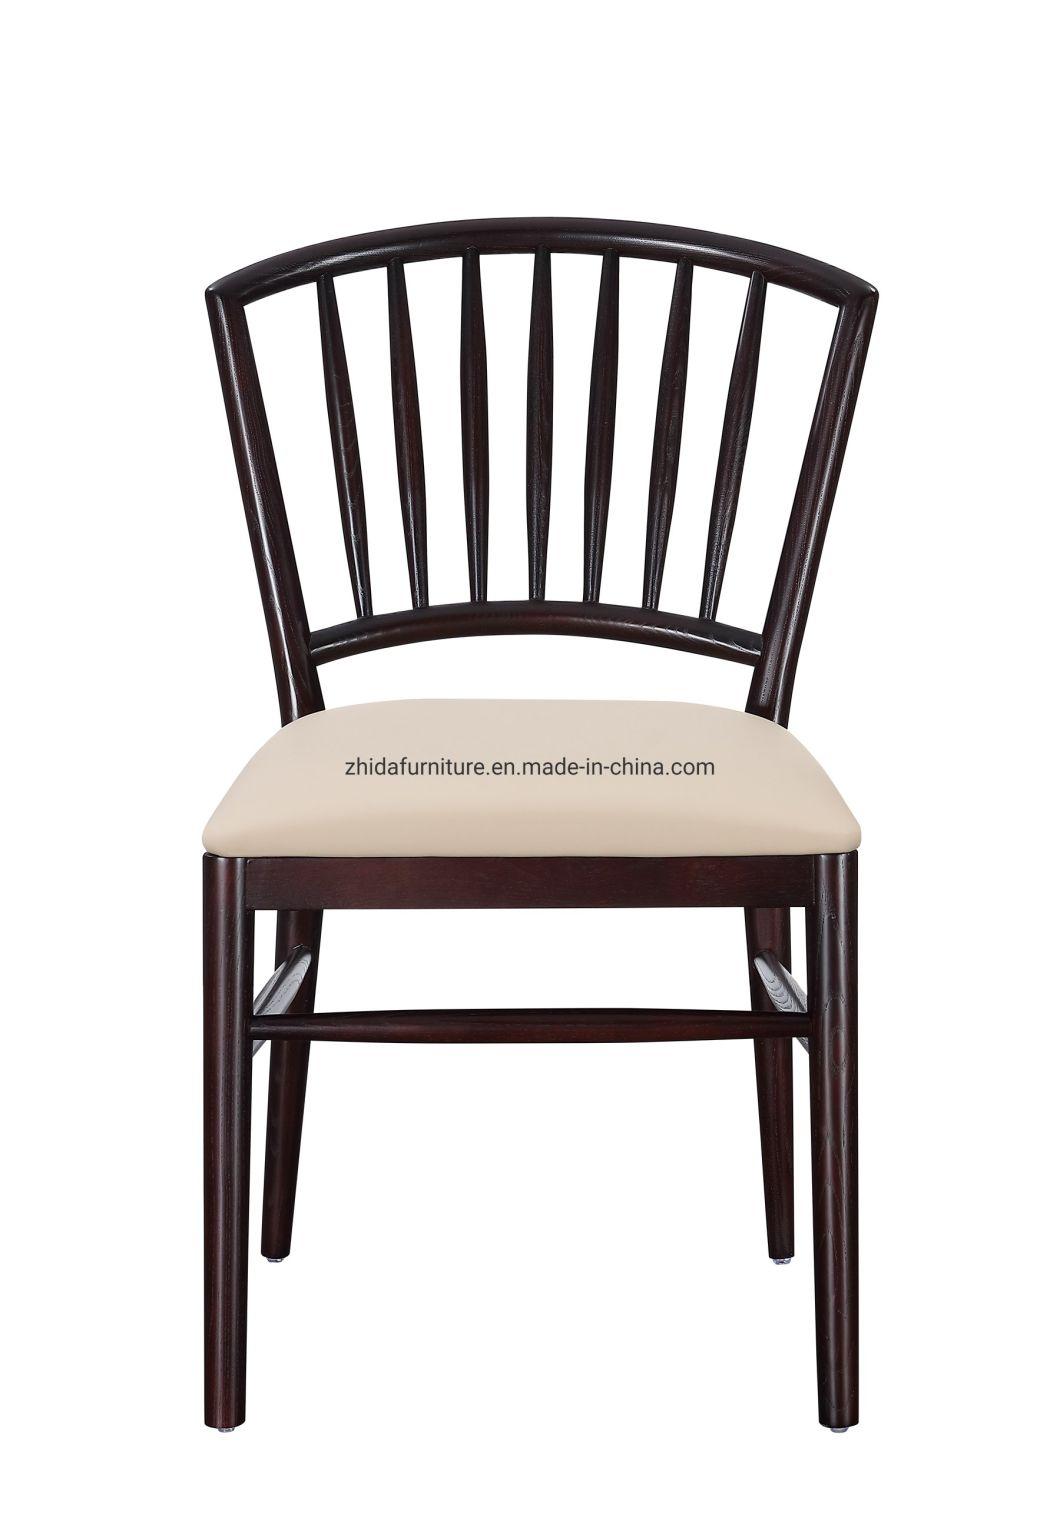 Modern Design Solid Wood Table Chair for Dining Room Hotel Restaurant Cafe Coffee Shop